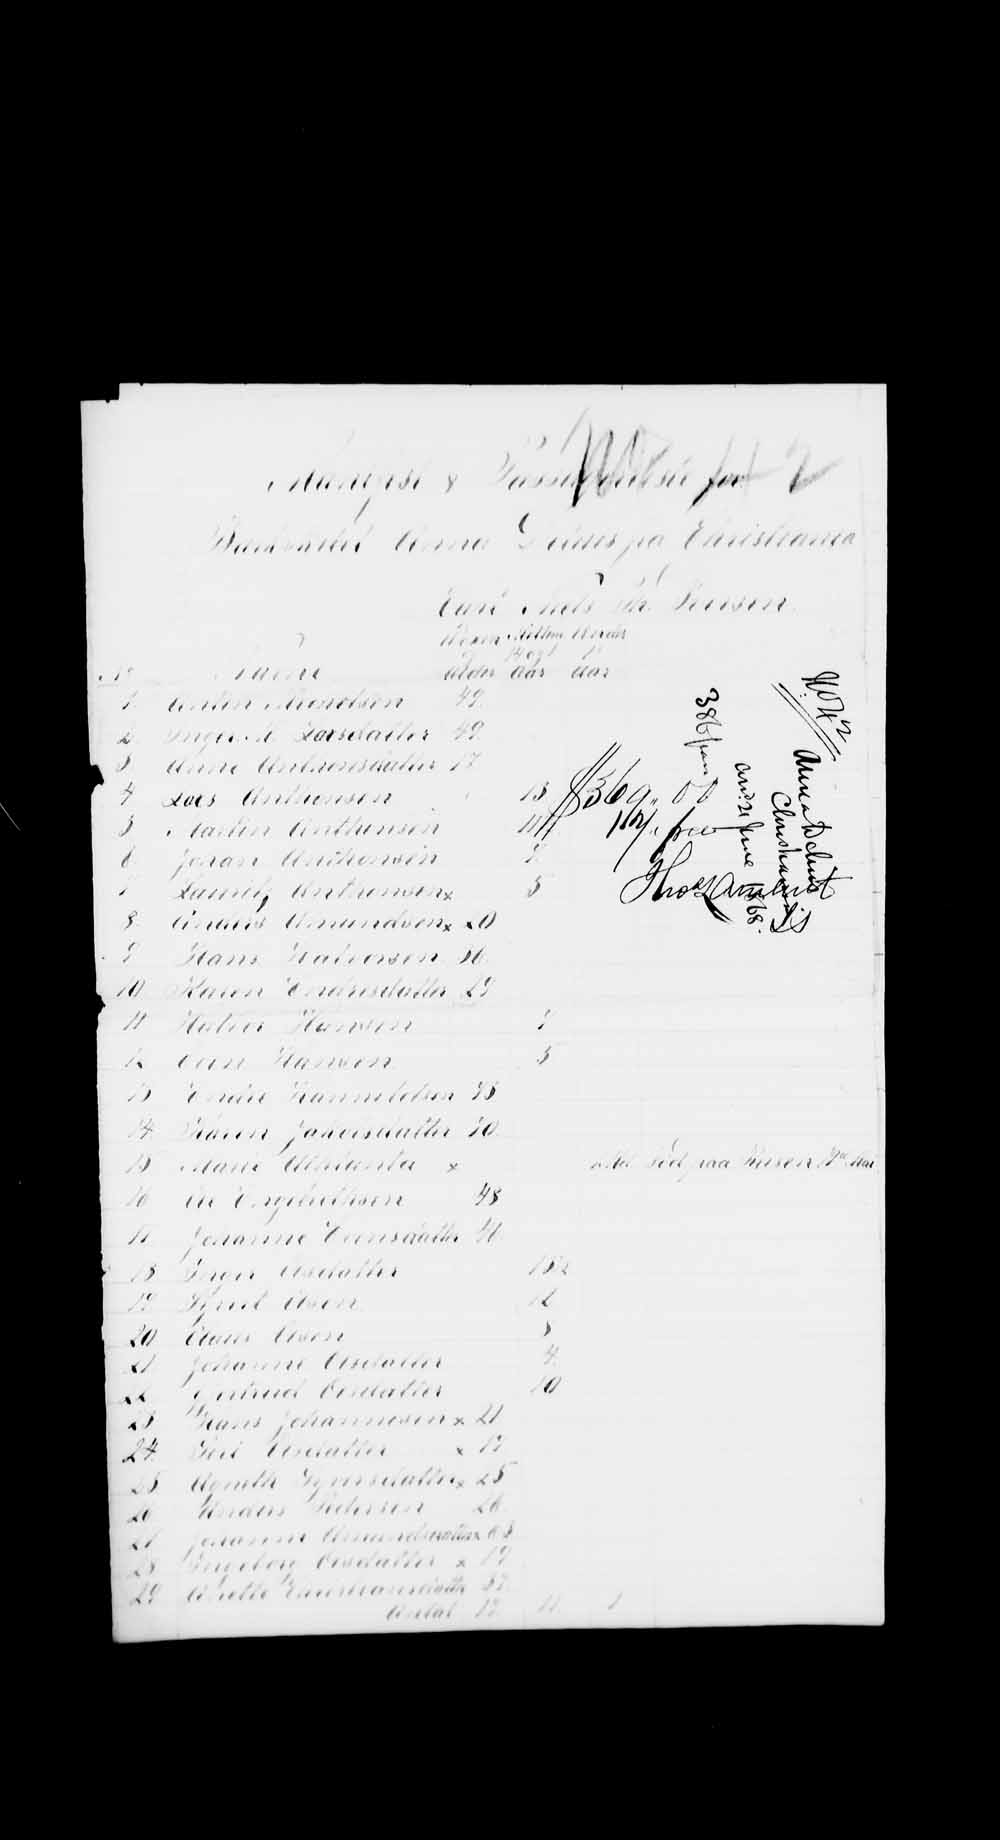 Digitized page of Passenger Lists for Image No.: e003530332